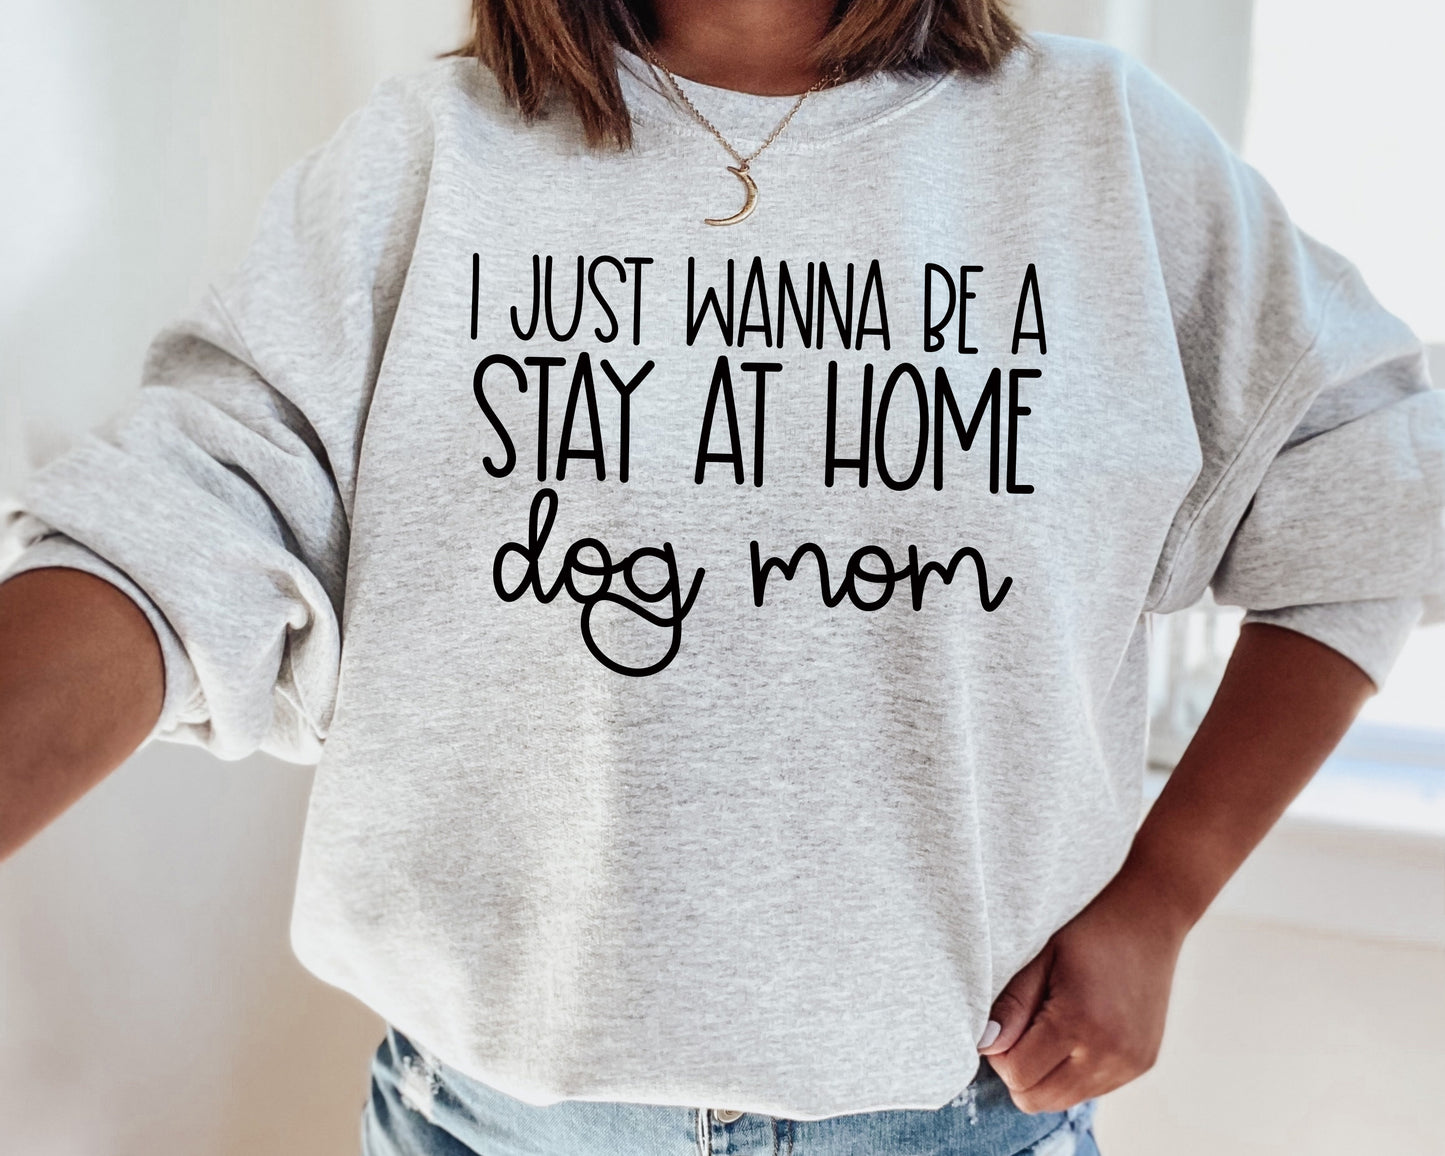 *I Just Wanna Be A Stay At Home Dog Mom T-Shirt or Crew Sweatshirt